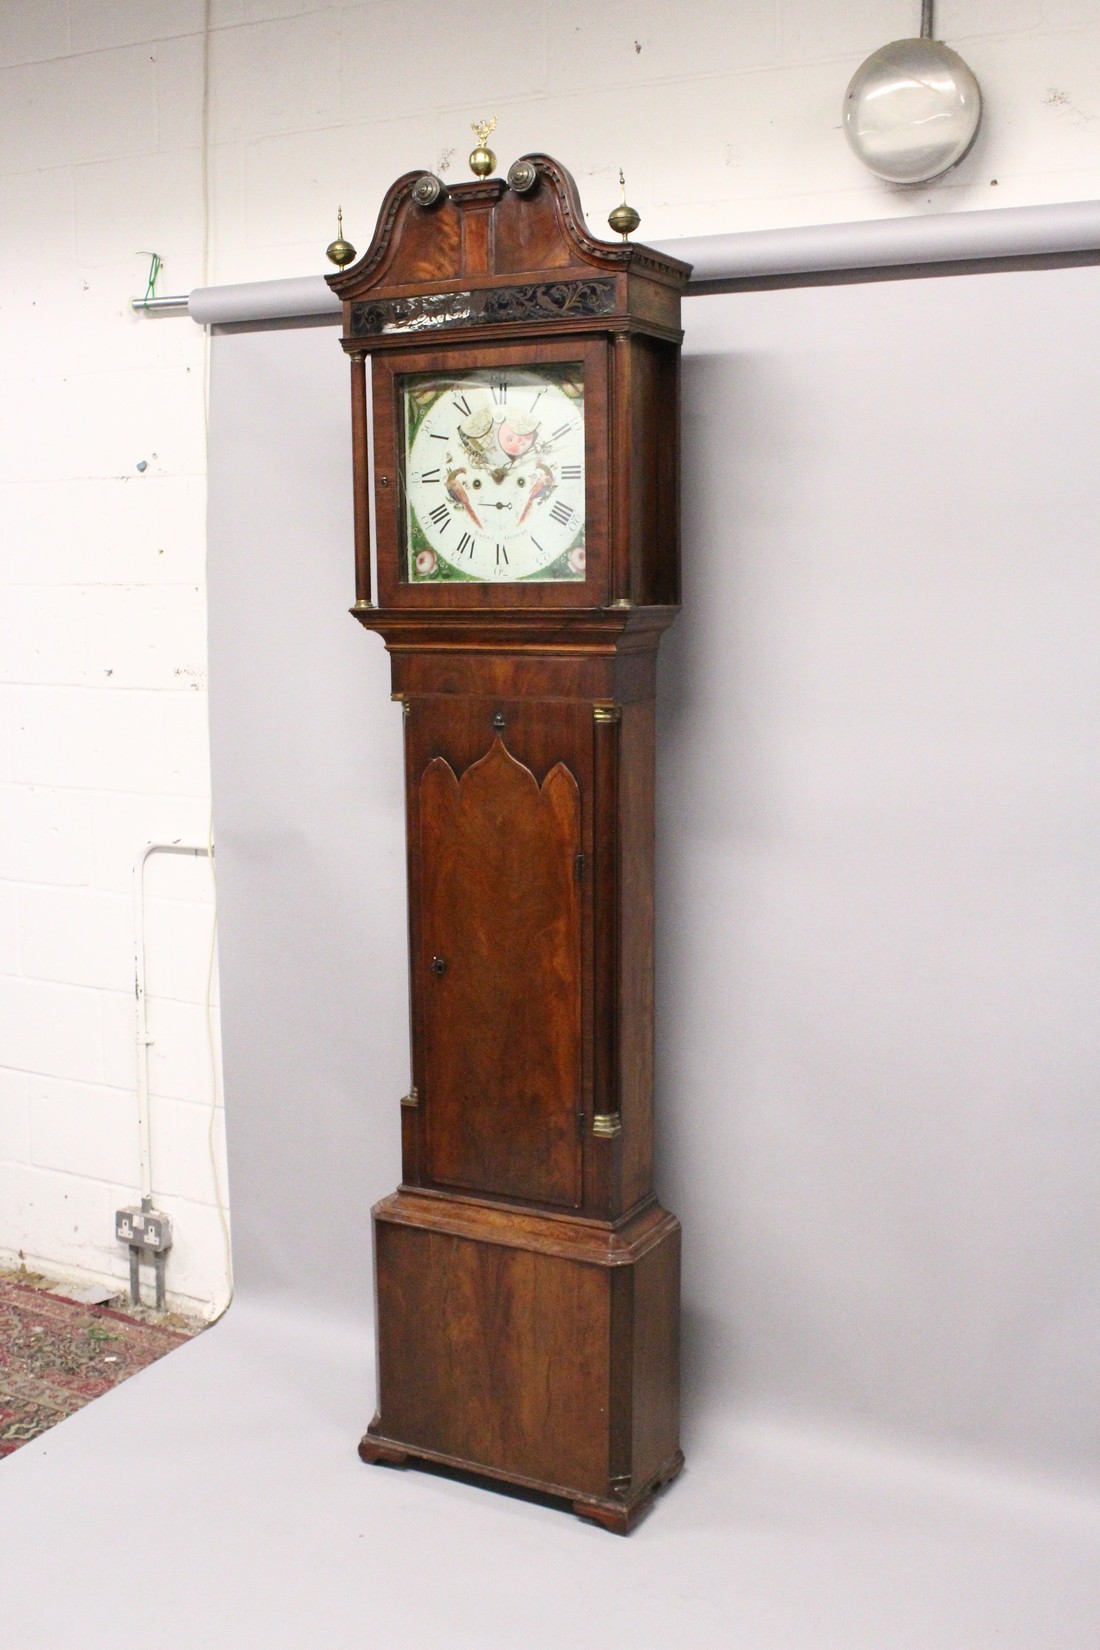 A GEORGE III MAHOGANY LONGCASE CLOCK BY BANKS, OLDHAM, with an eight day moonphase movement, - Image 4 of 9